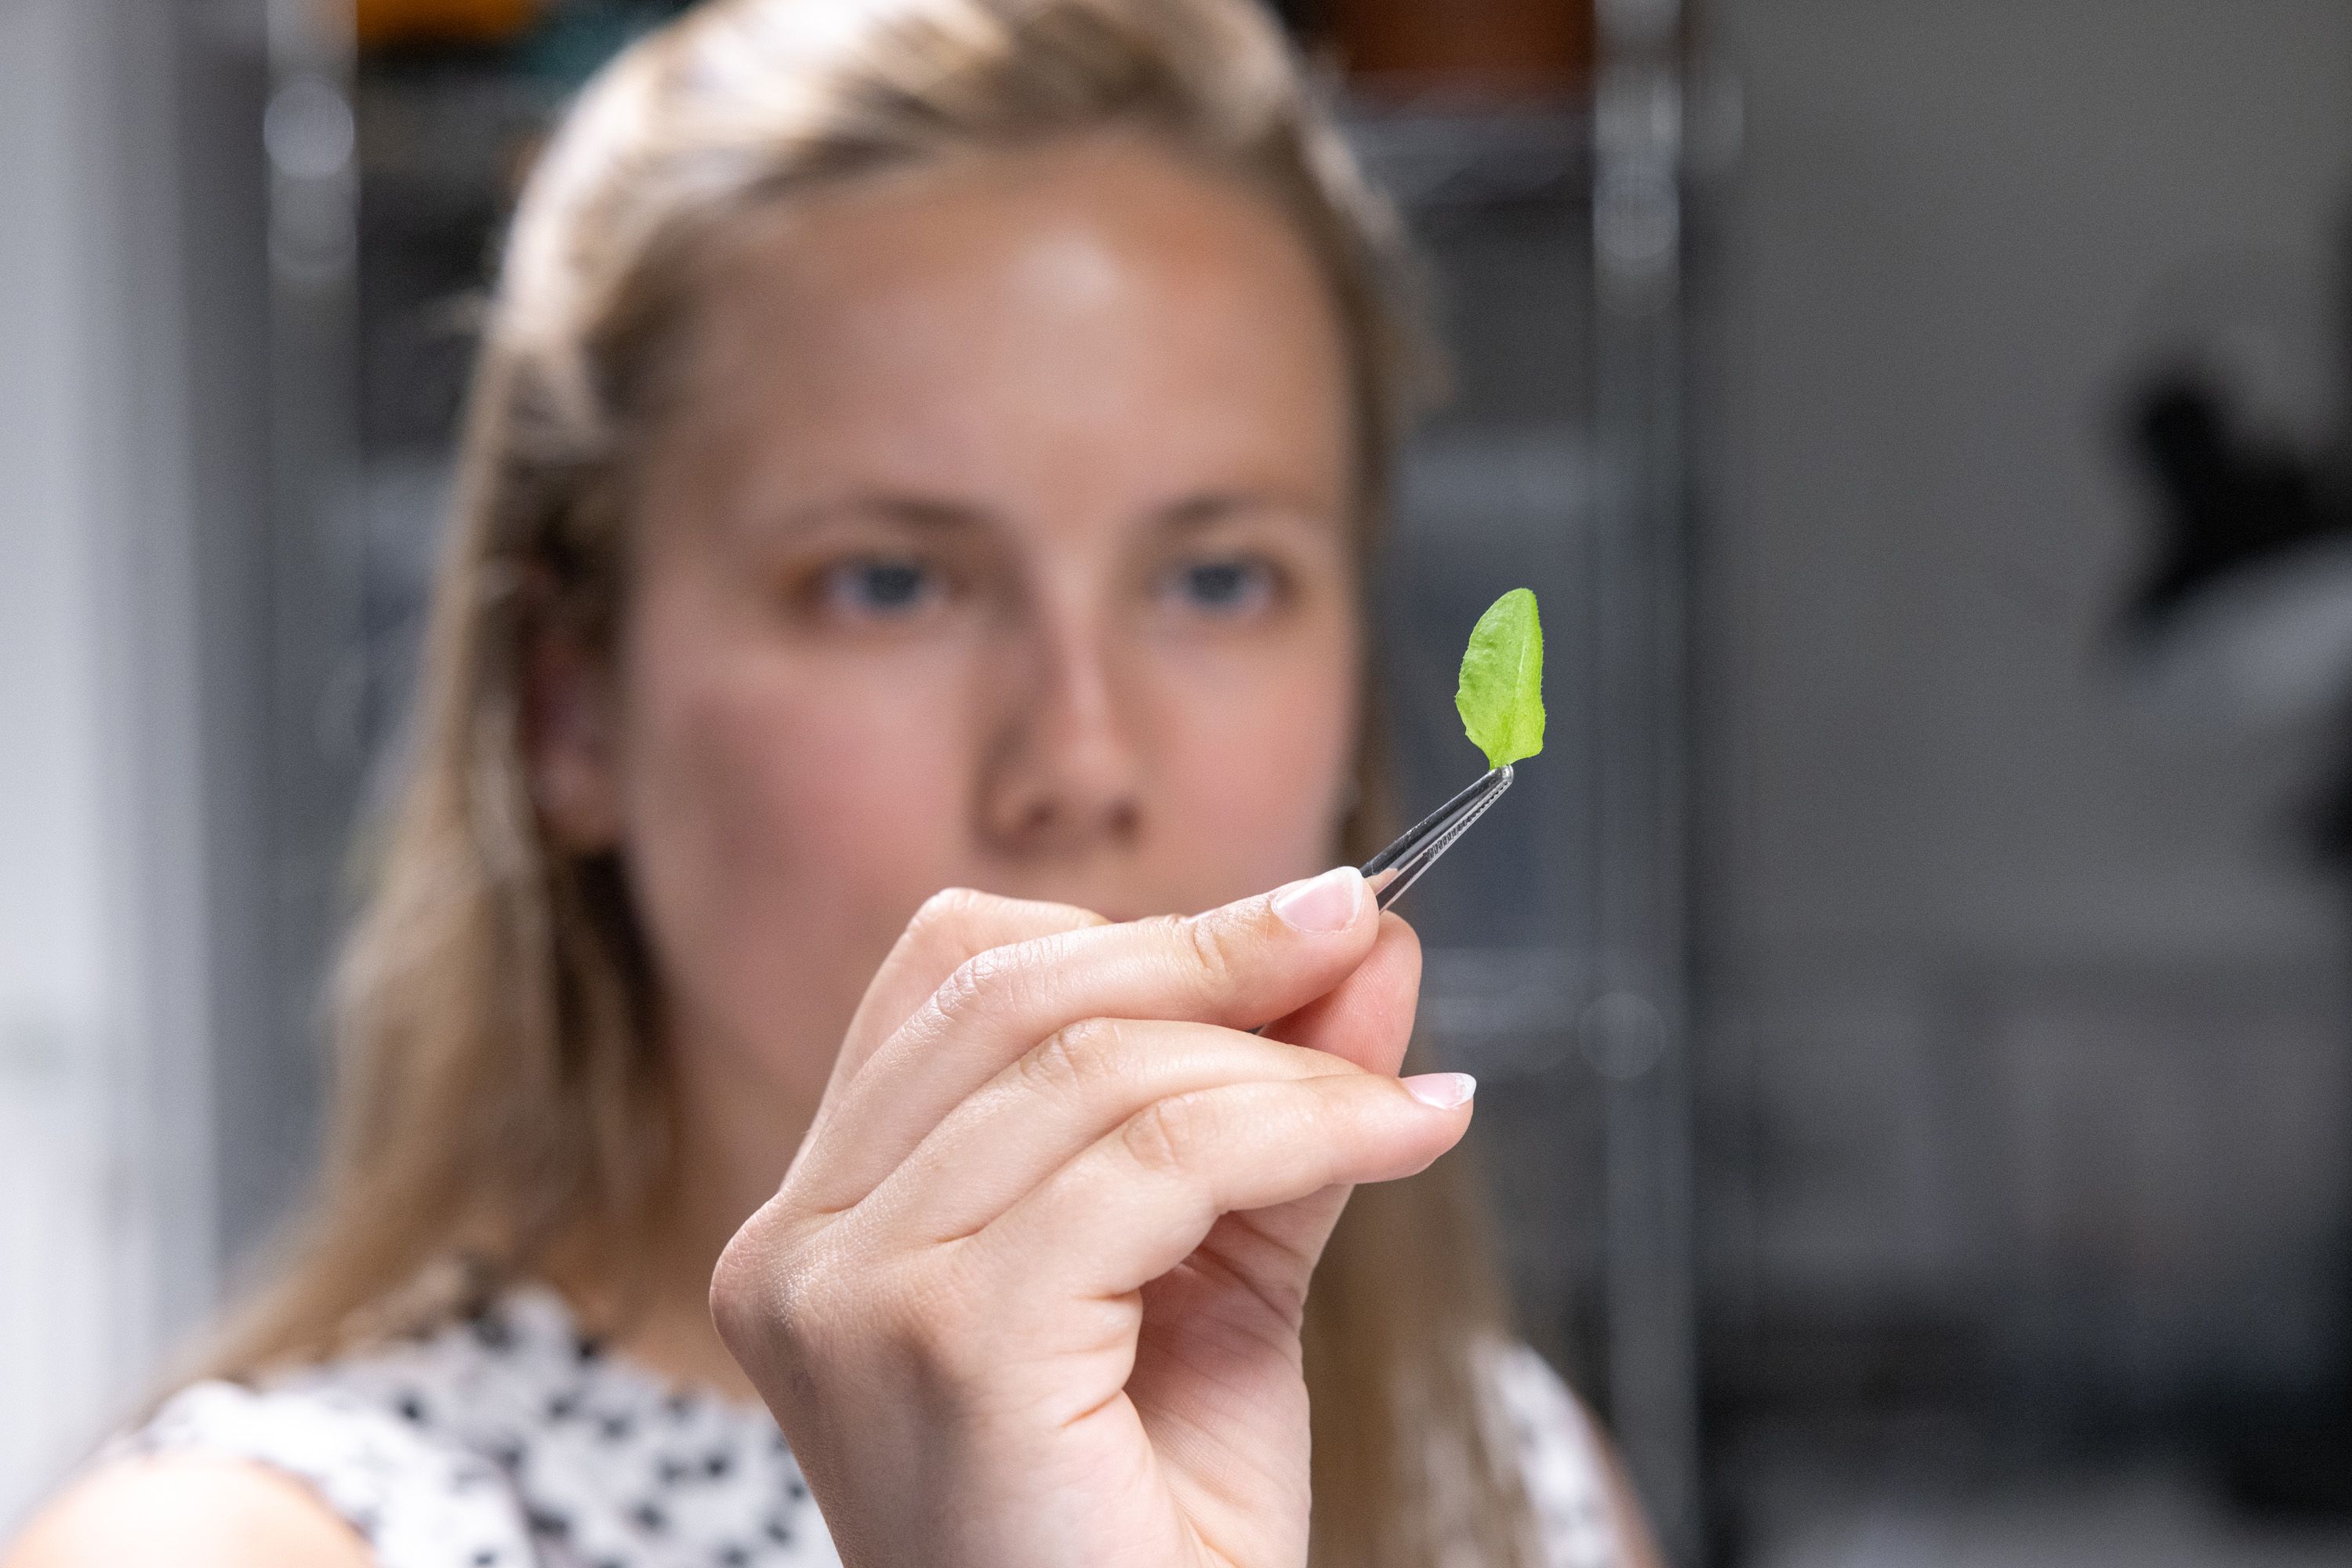 The woman holds up a leaf with tweezers and examines it closely